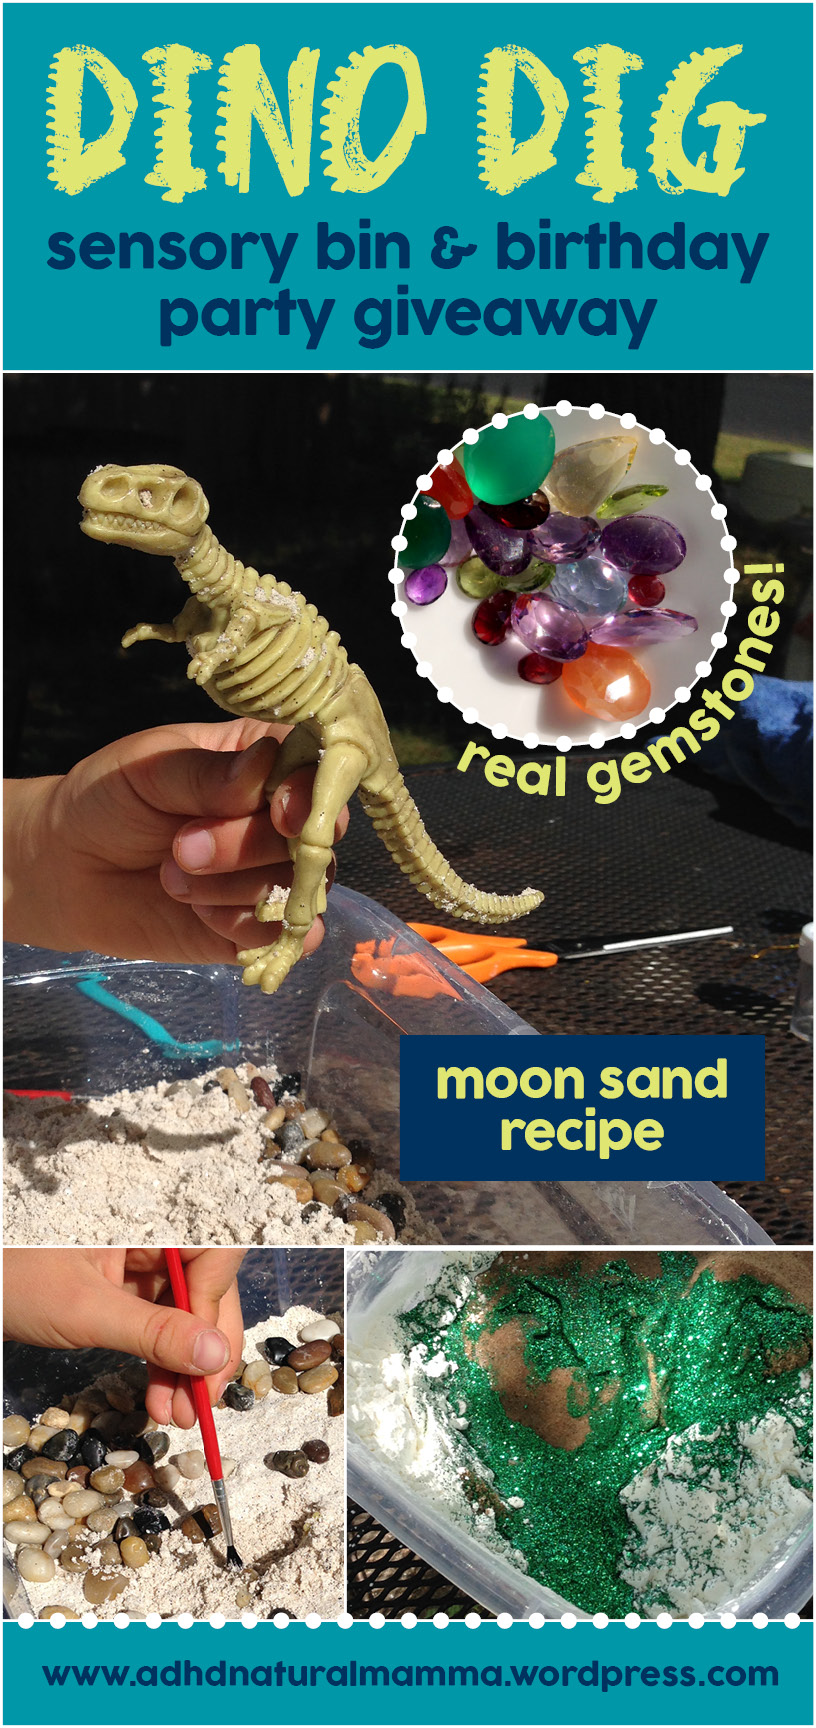 Fossil or Dinosaur Birthday Party Ideas on a Frugal Budget